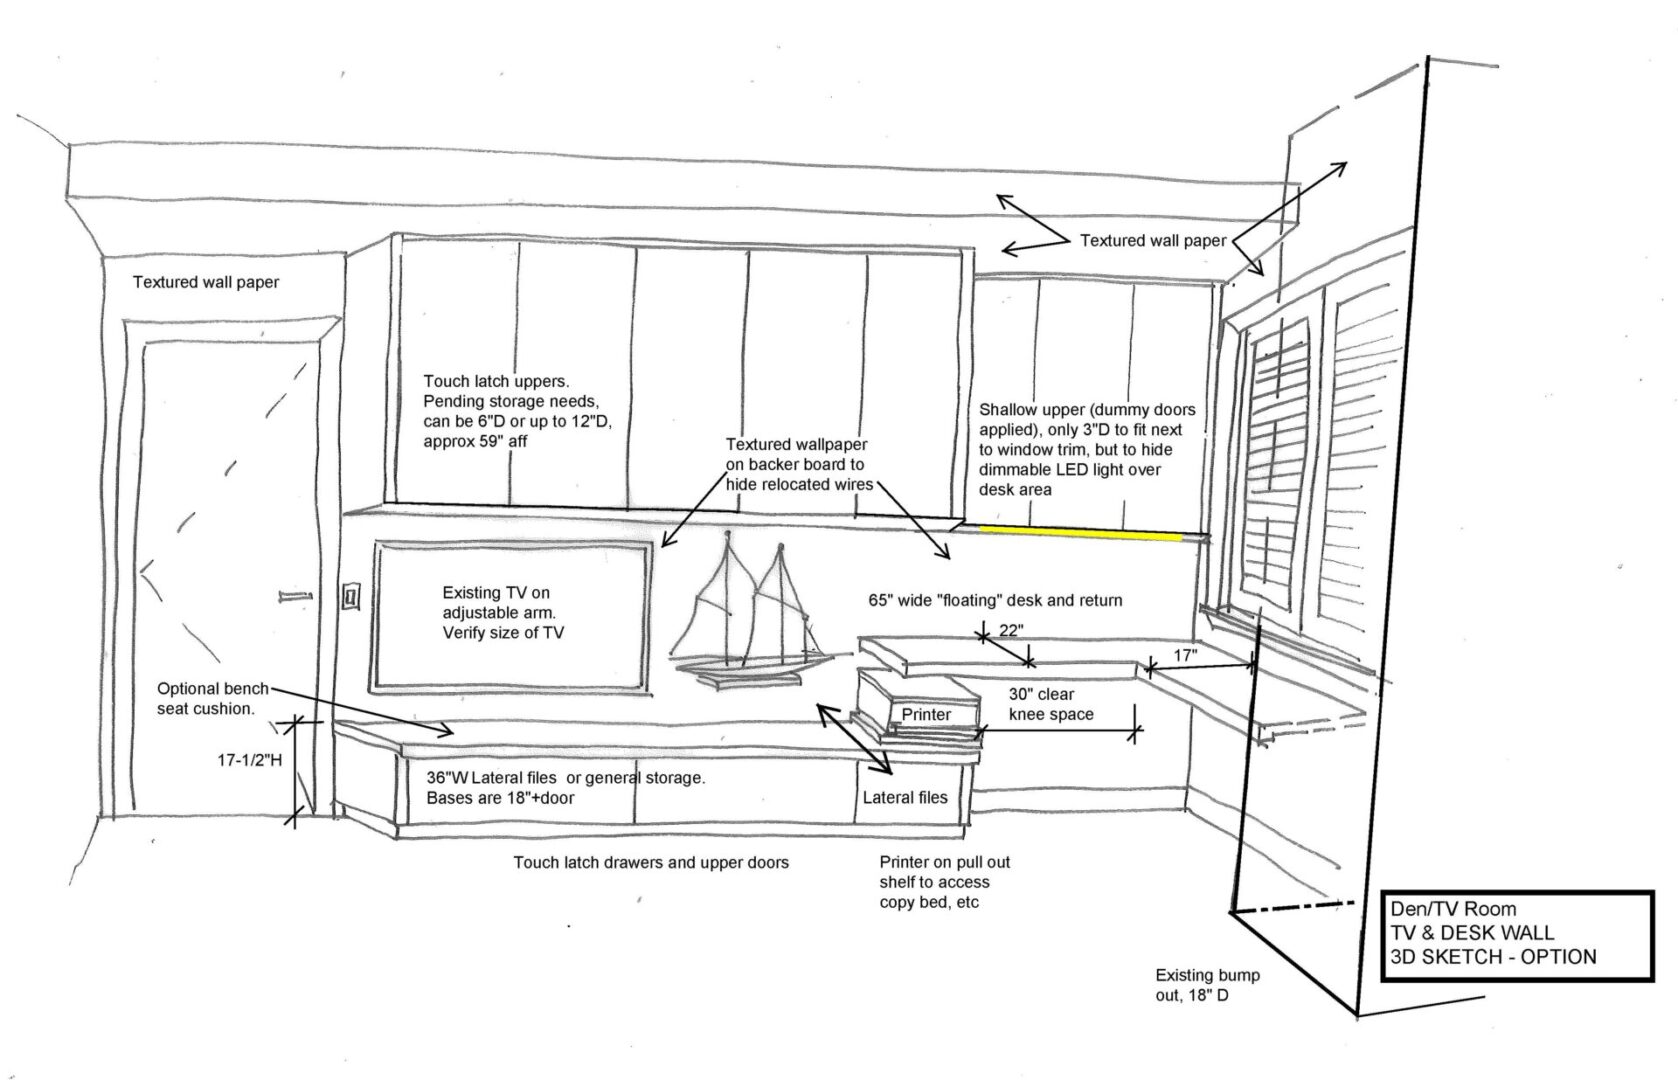 Sketch view of study room with all equipments